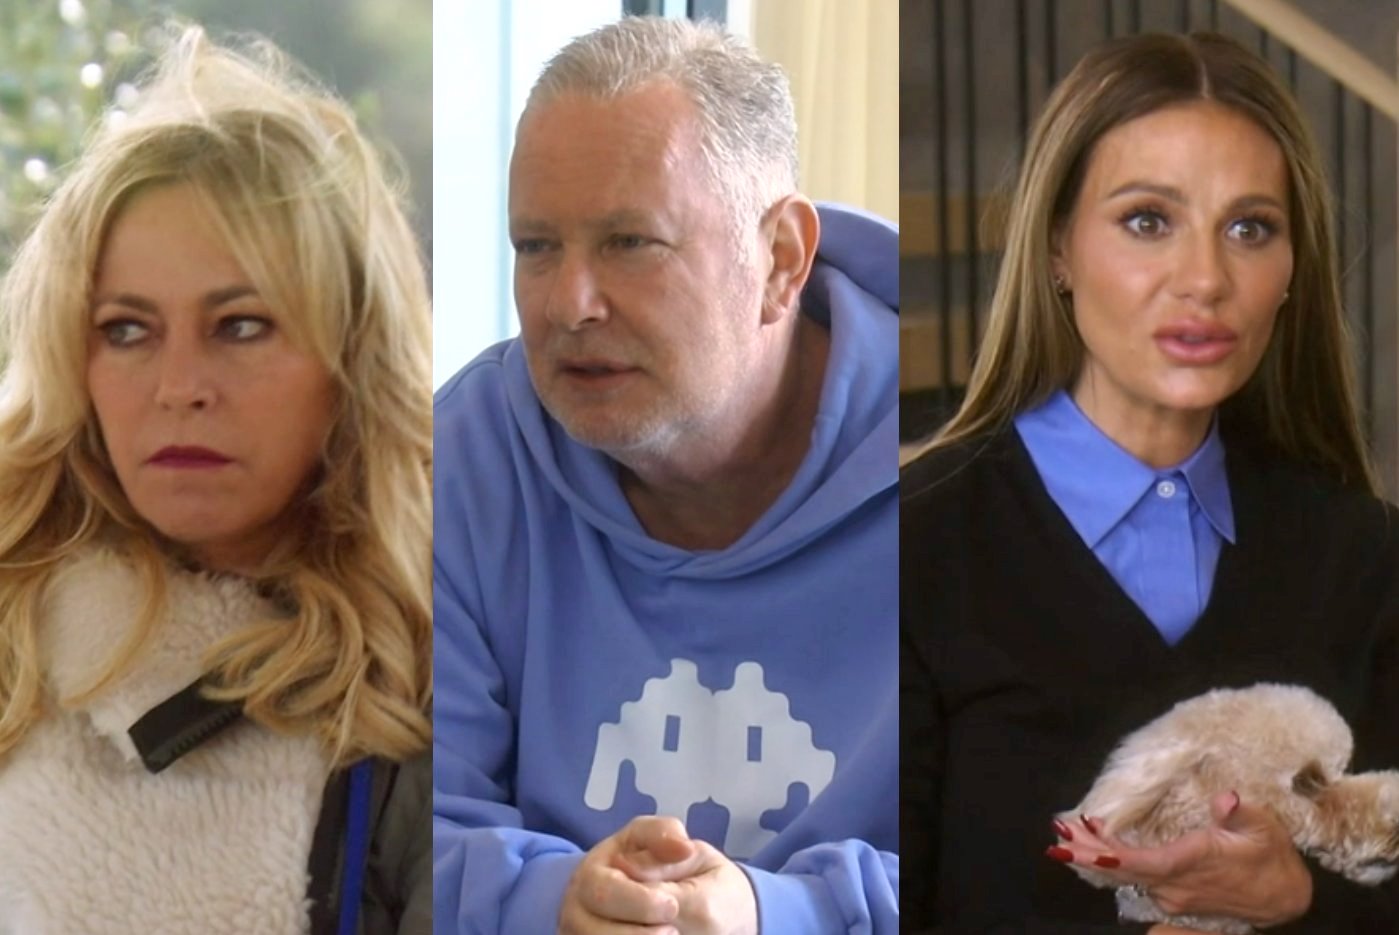 RHOBH Premiere Recap: Sutton Says PK May Have Been With a Woman During DUI, as Kyle & Mauricio Bicker Over Tattoos & Dorit Confronts Erika Over Marriage Diss and Talks Feeling Disconnected From PK